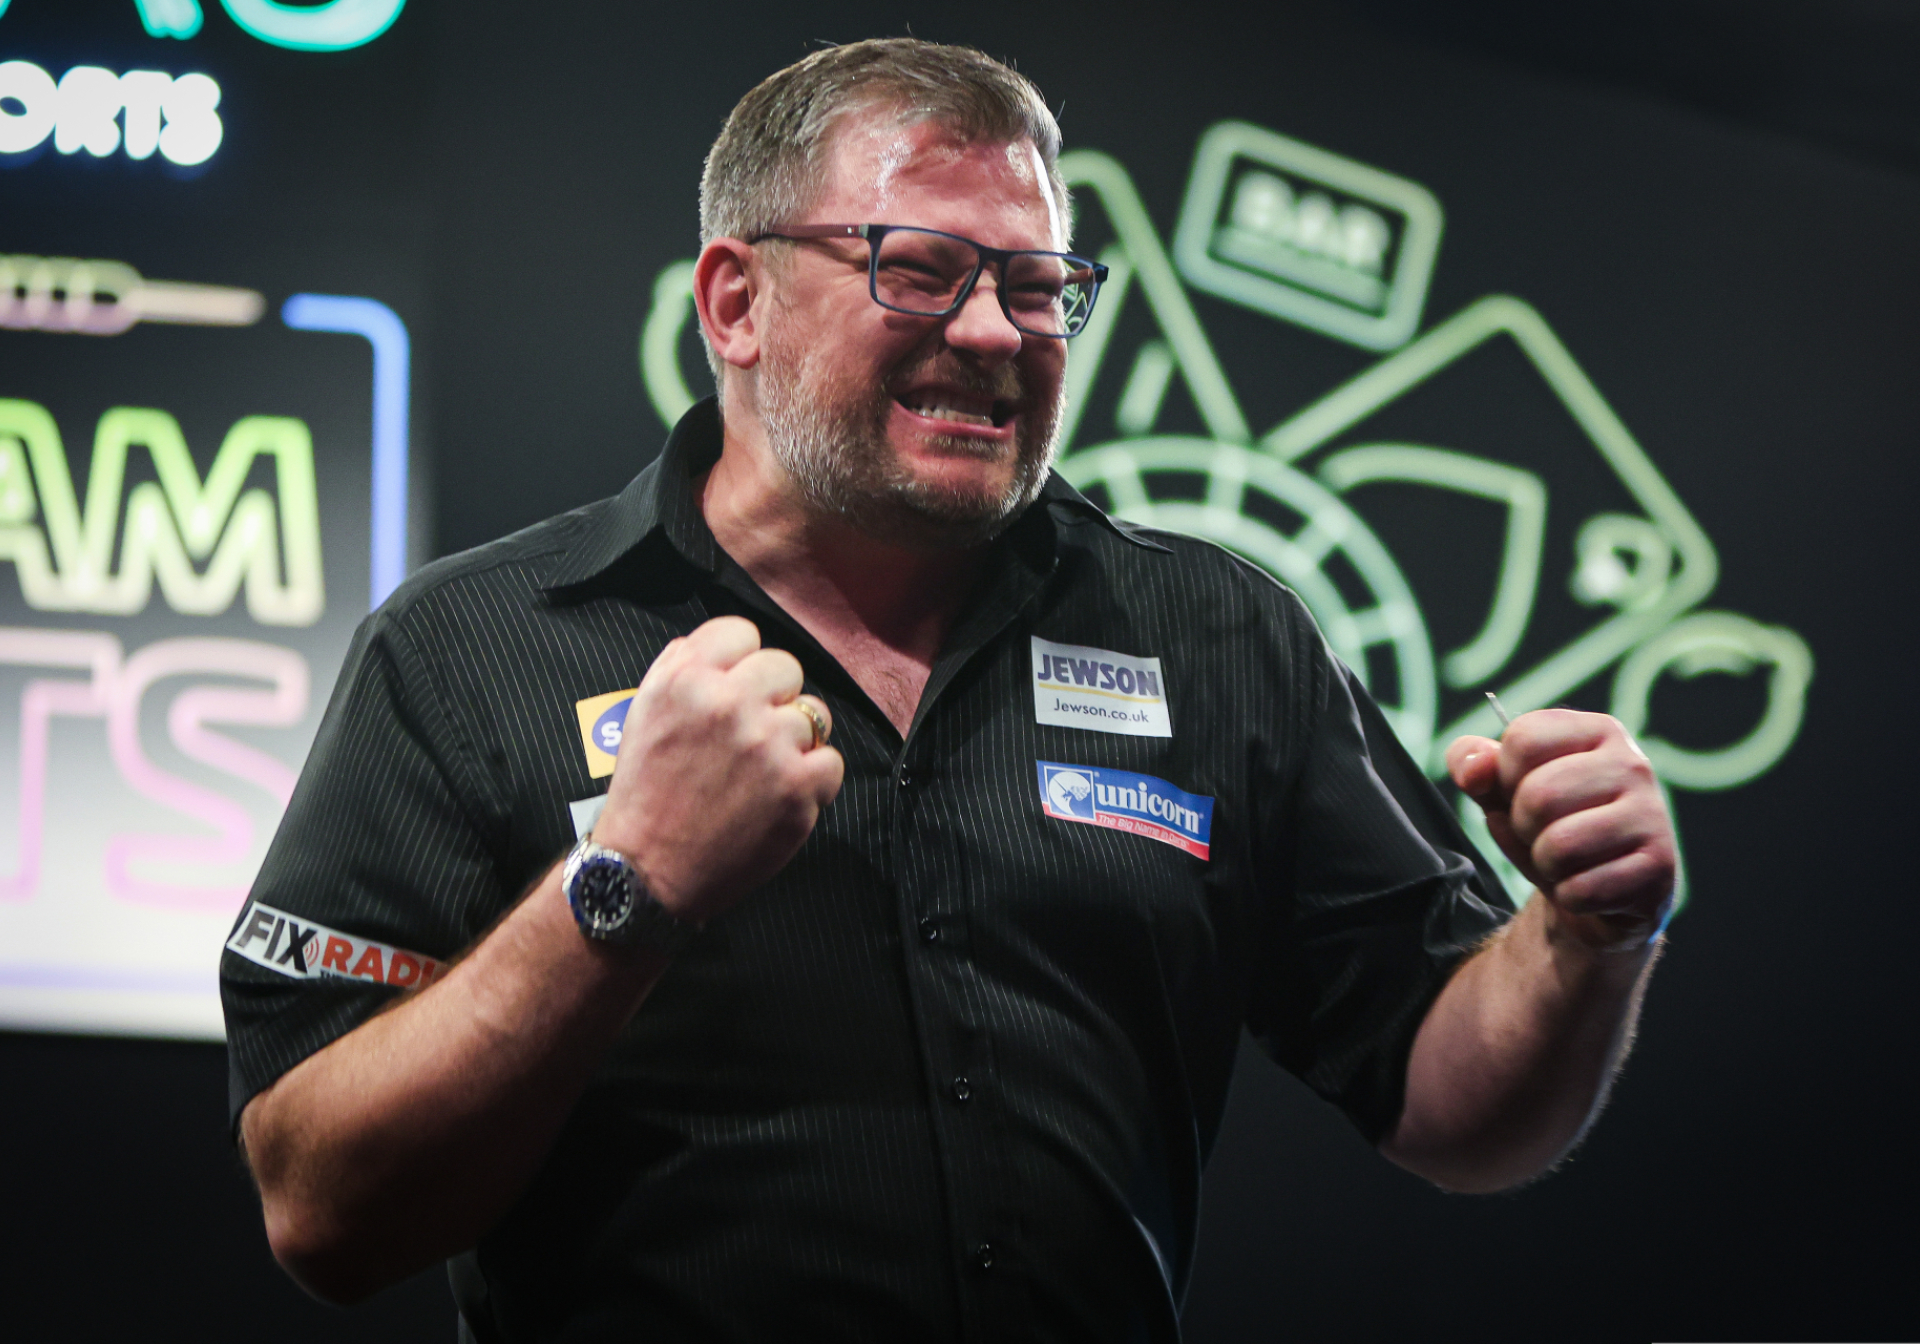 Wade and Humphries to meet in semis after winning quarter-final epics PDC